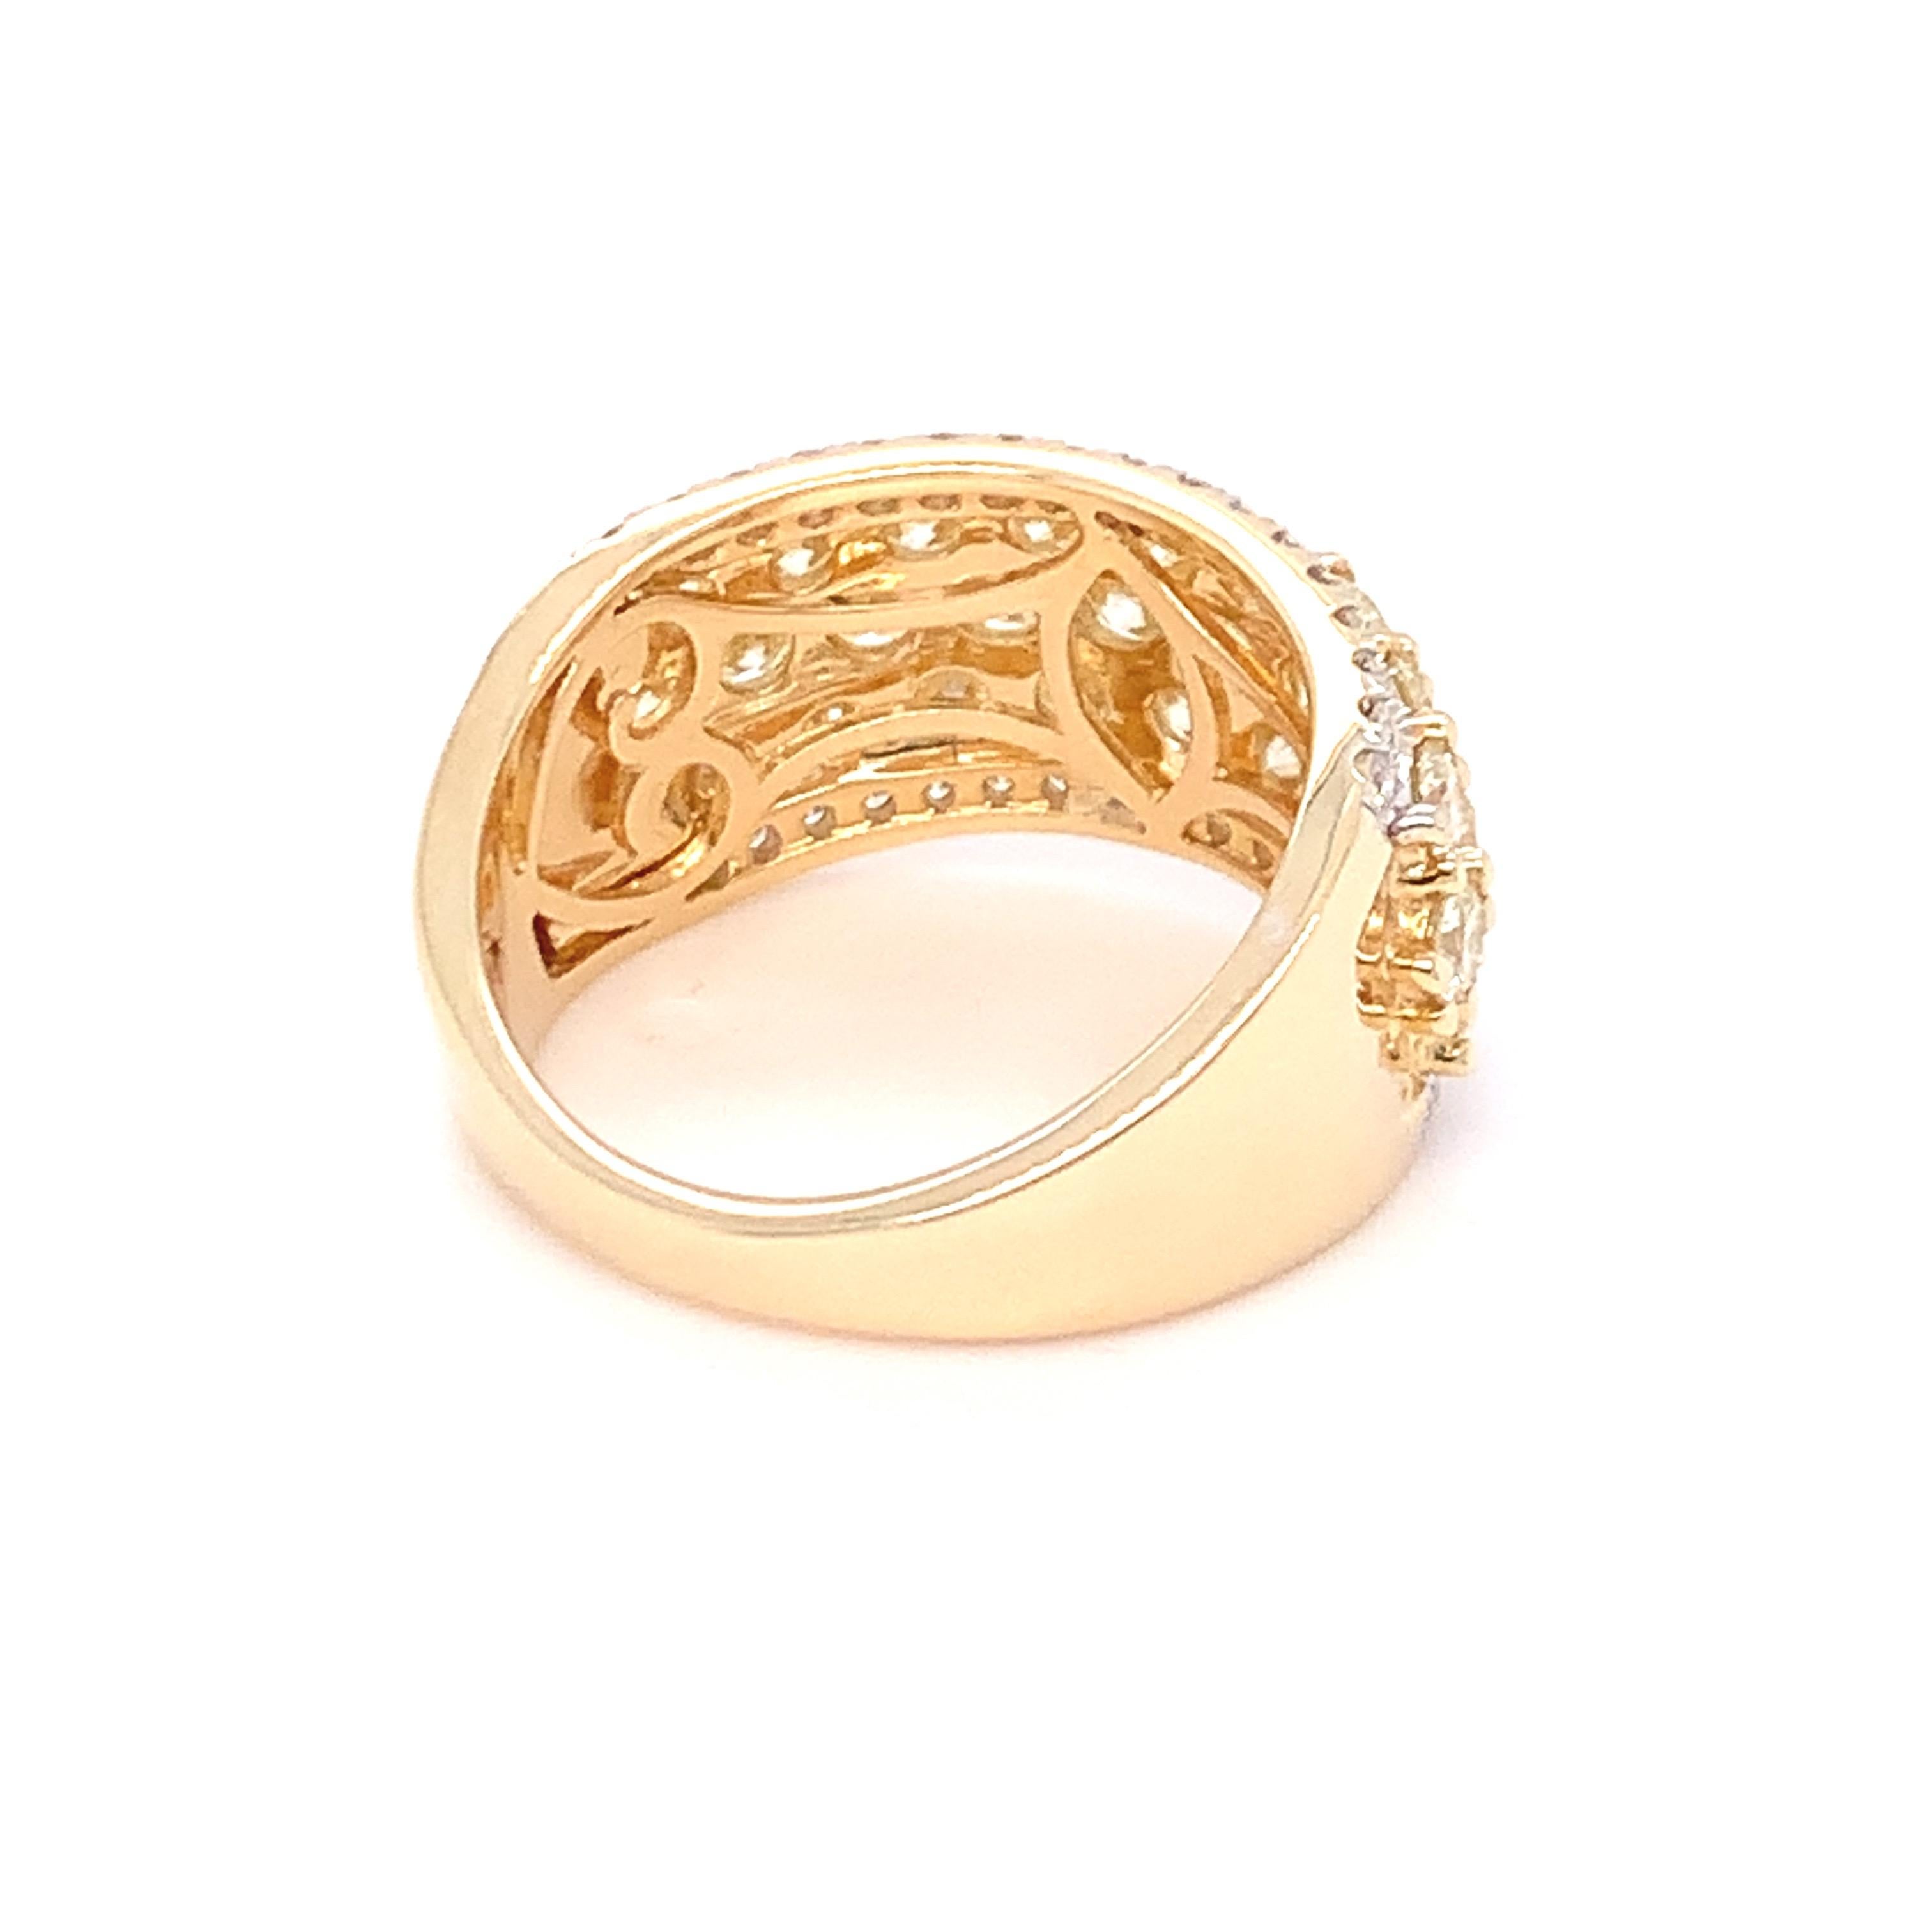 2.50 Carat Yellow & White Diamond Band Ring in 14k Yellow Gold For Sale 9